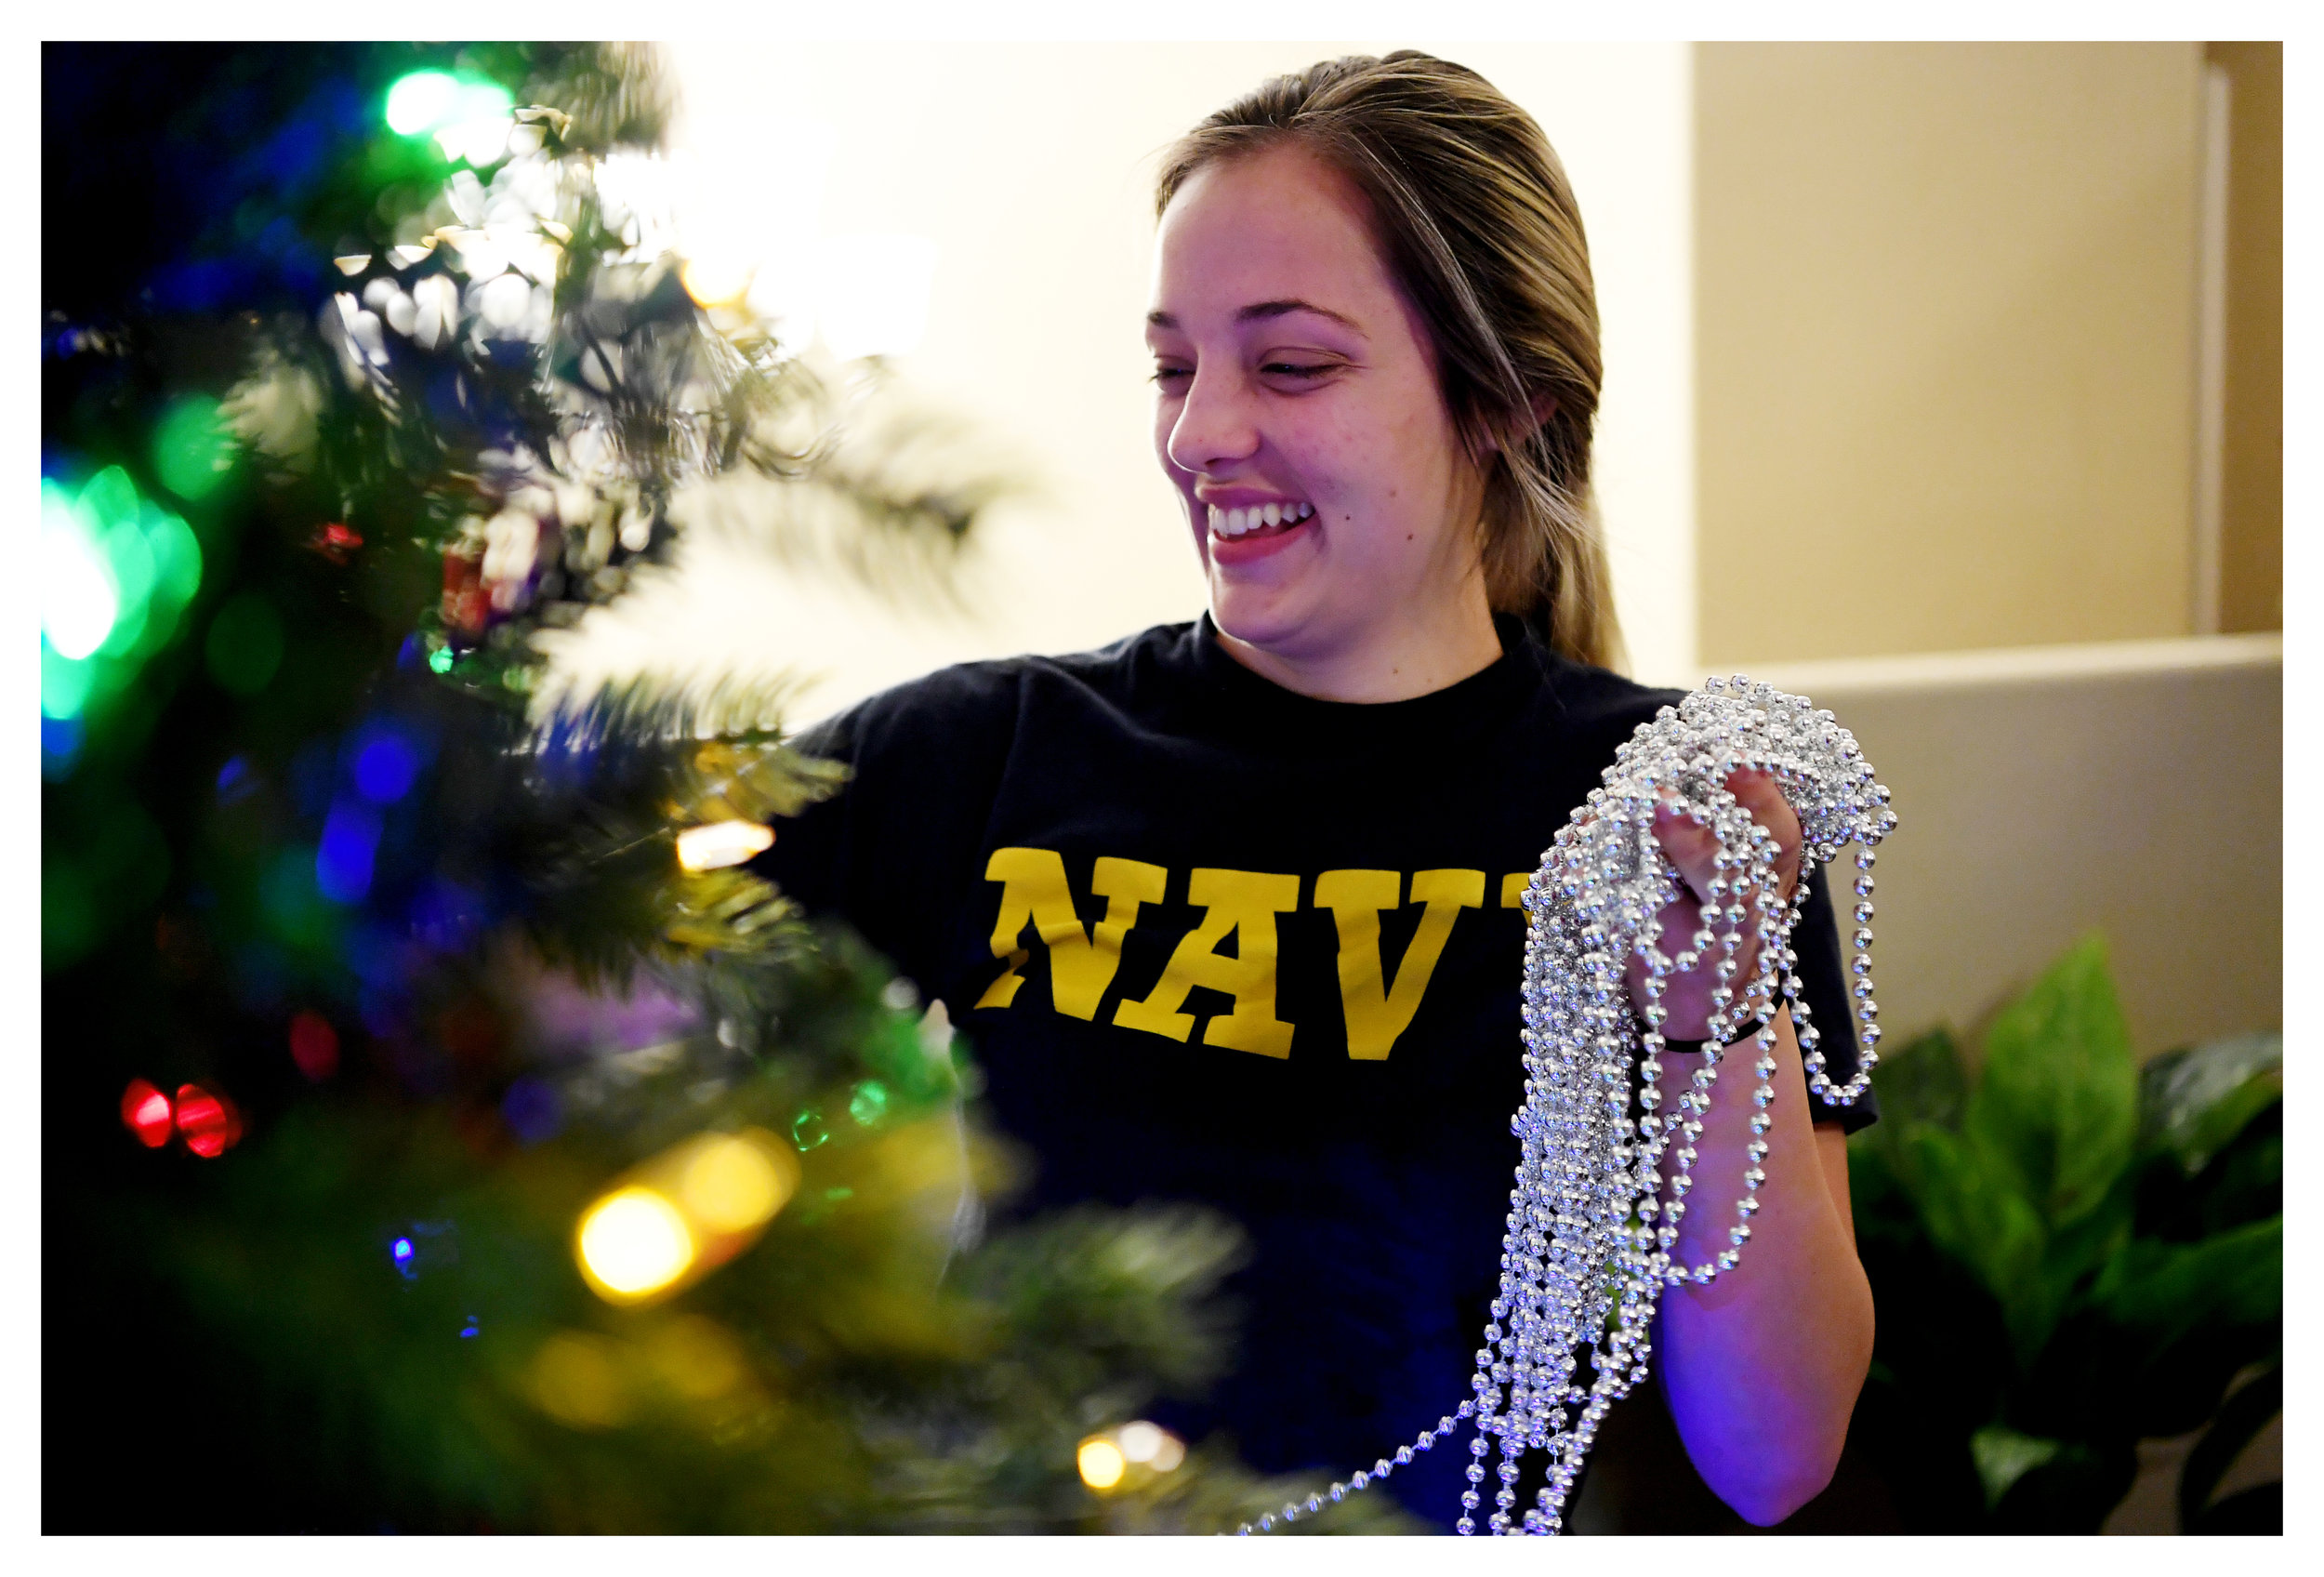  Mariah, a foster child under the care of the Wyatt family, helps decorate the Christmas tree November 30, 2019. She was placed into the foster care system when her parents were overcome with addiction. 